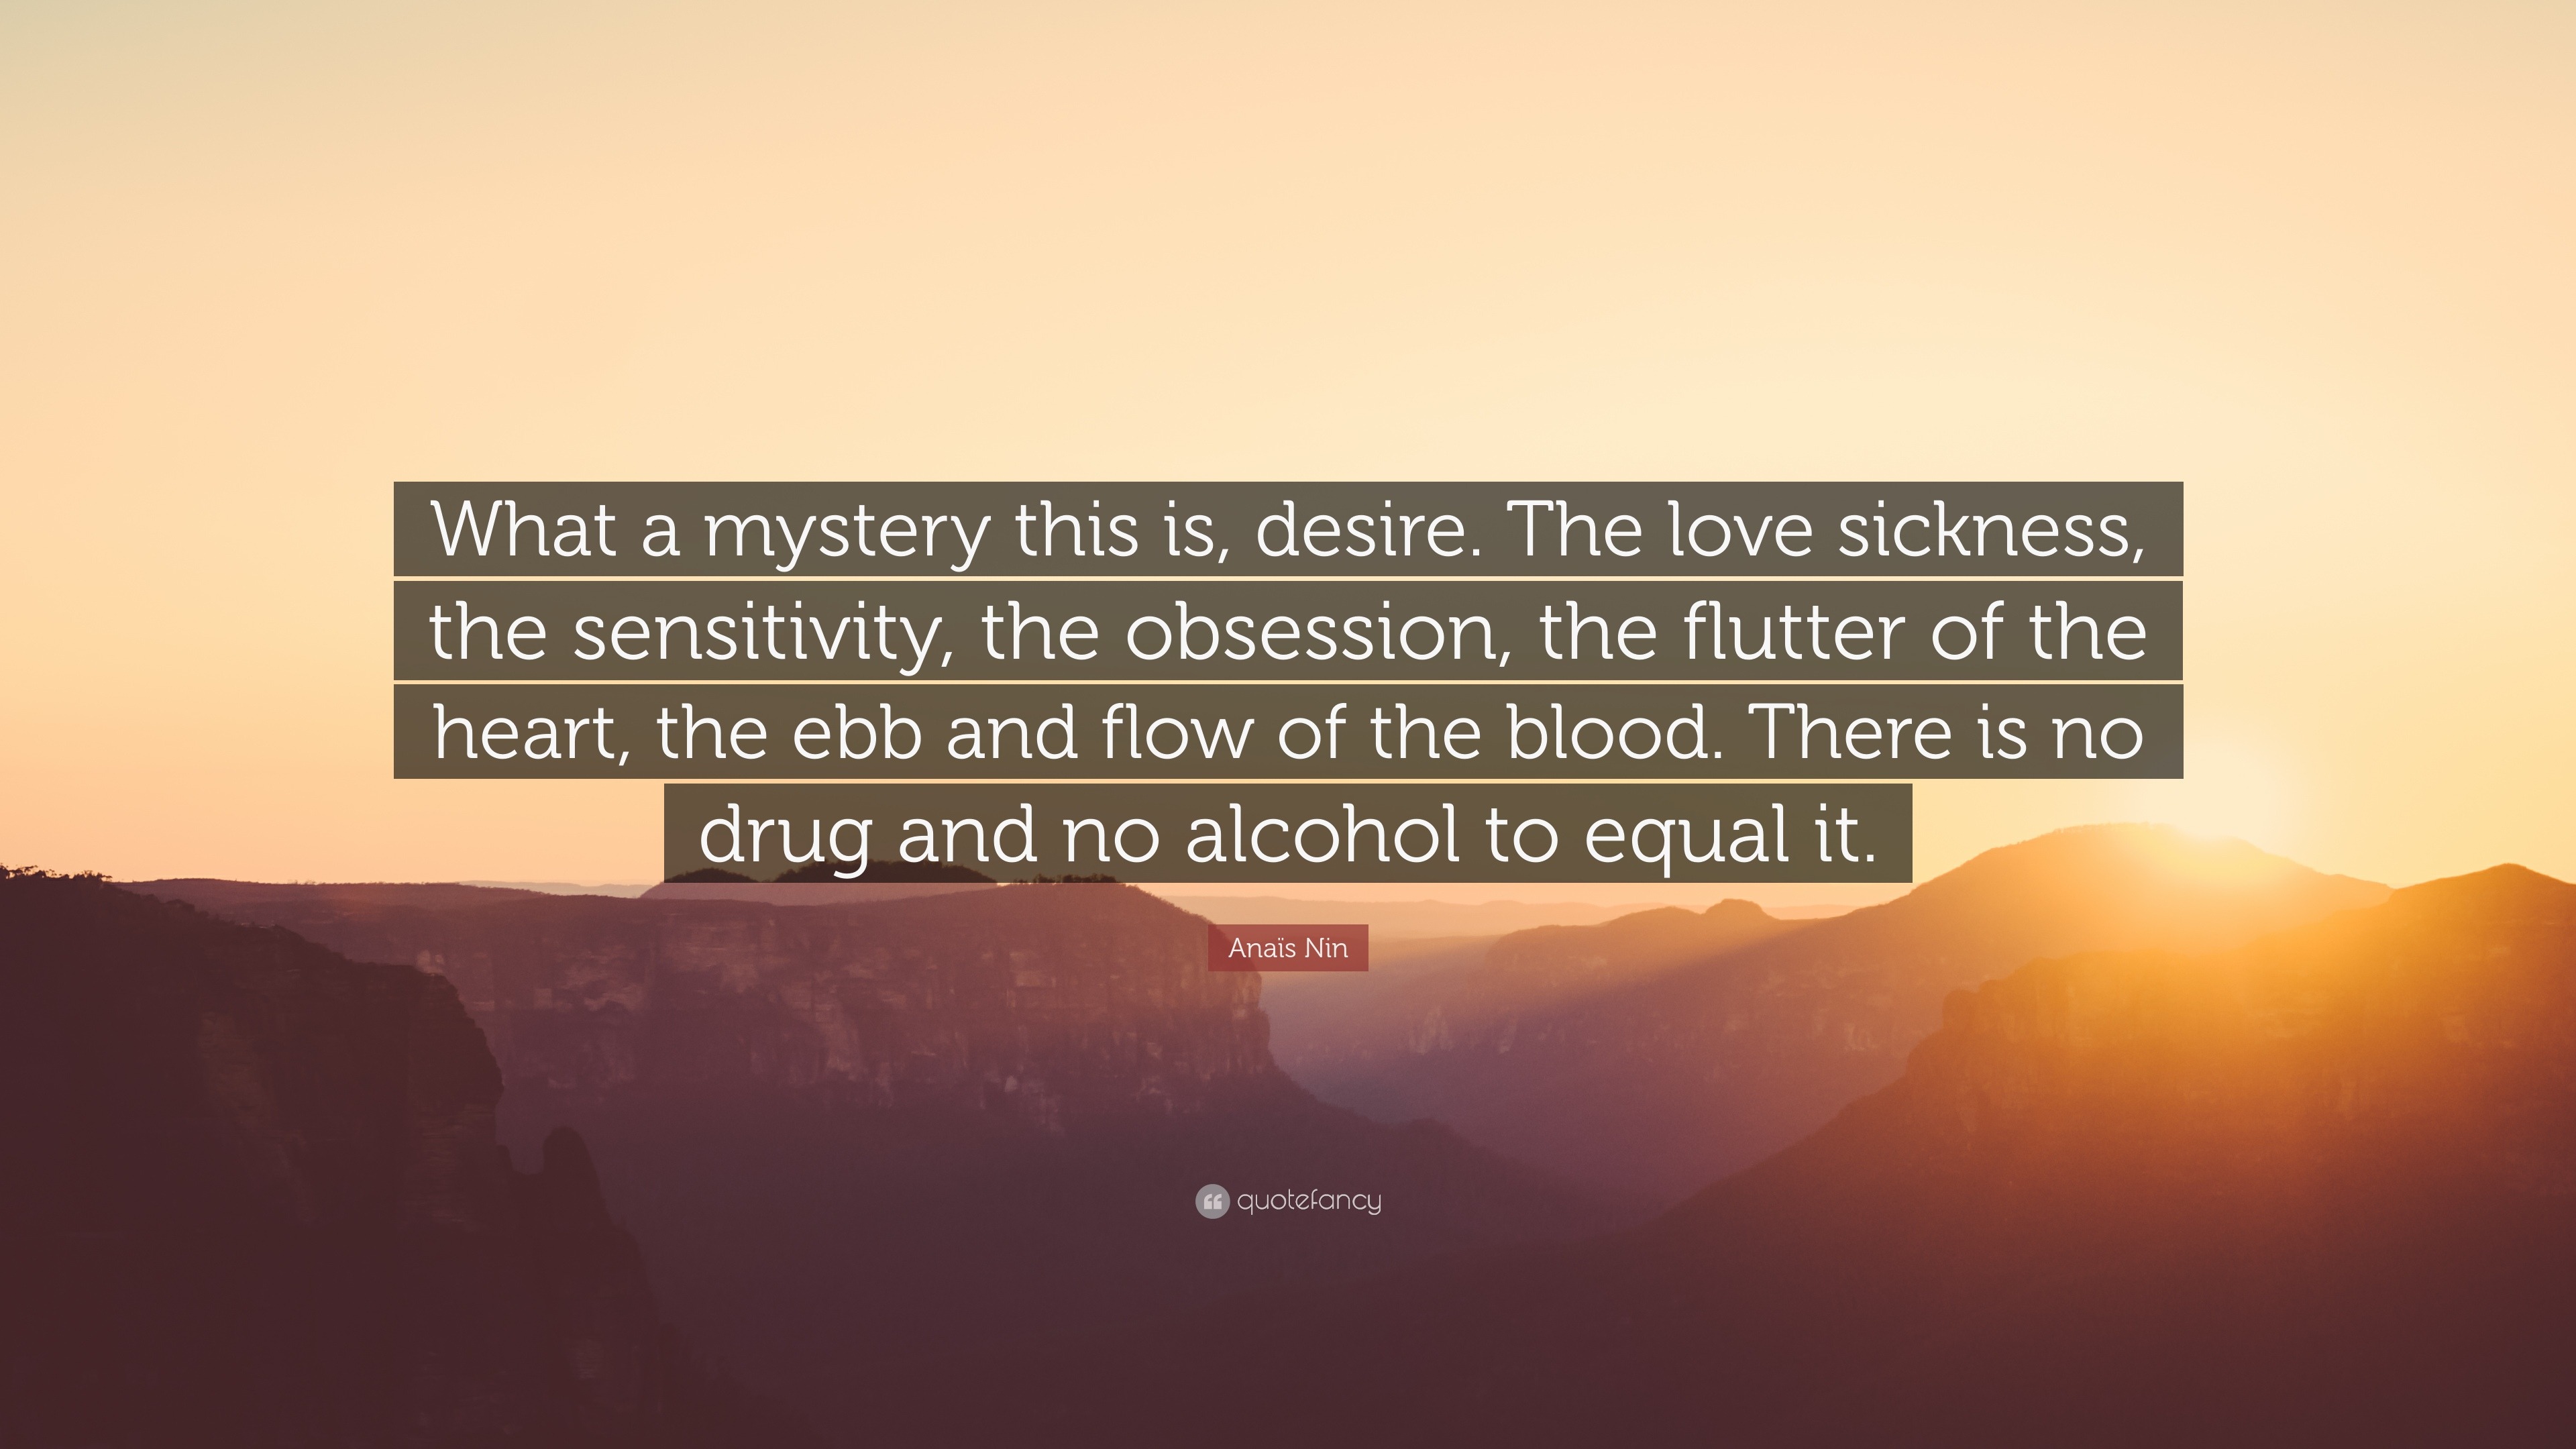 https://quotefancy.com/media/wallpaper/3840x2160/390956-Ana-s-Nin-Quote-What-a-mystery-this-is-desire-The-love-sickness.jpg